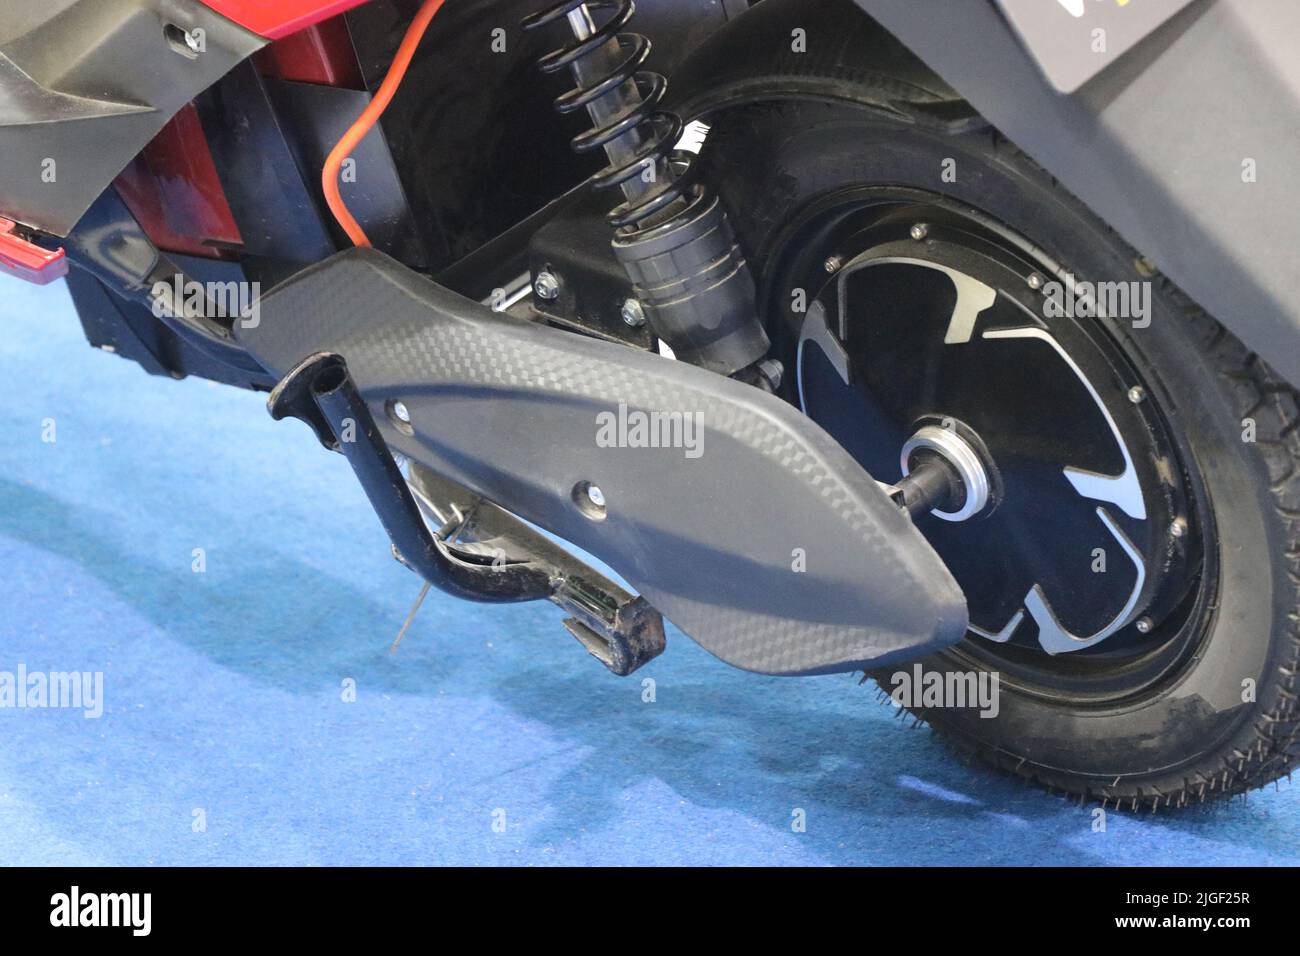 Electric scooter rear wheel with brushless dc motor connected along with a view of suspension spring Stock Photo